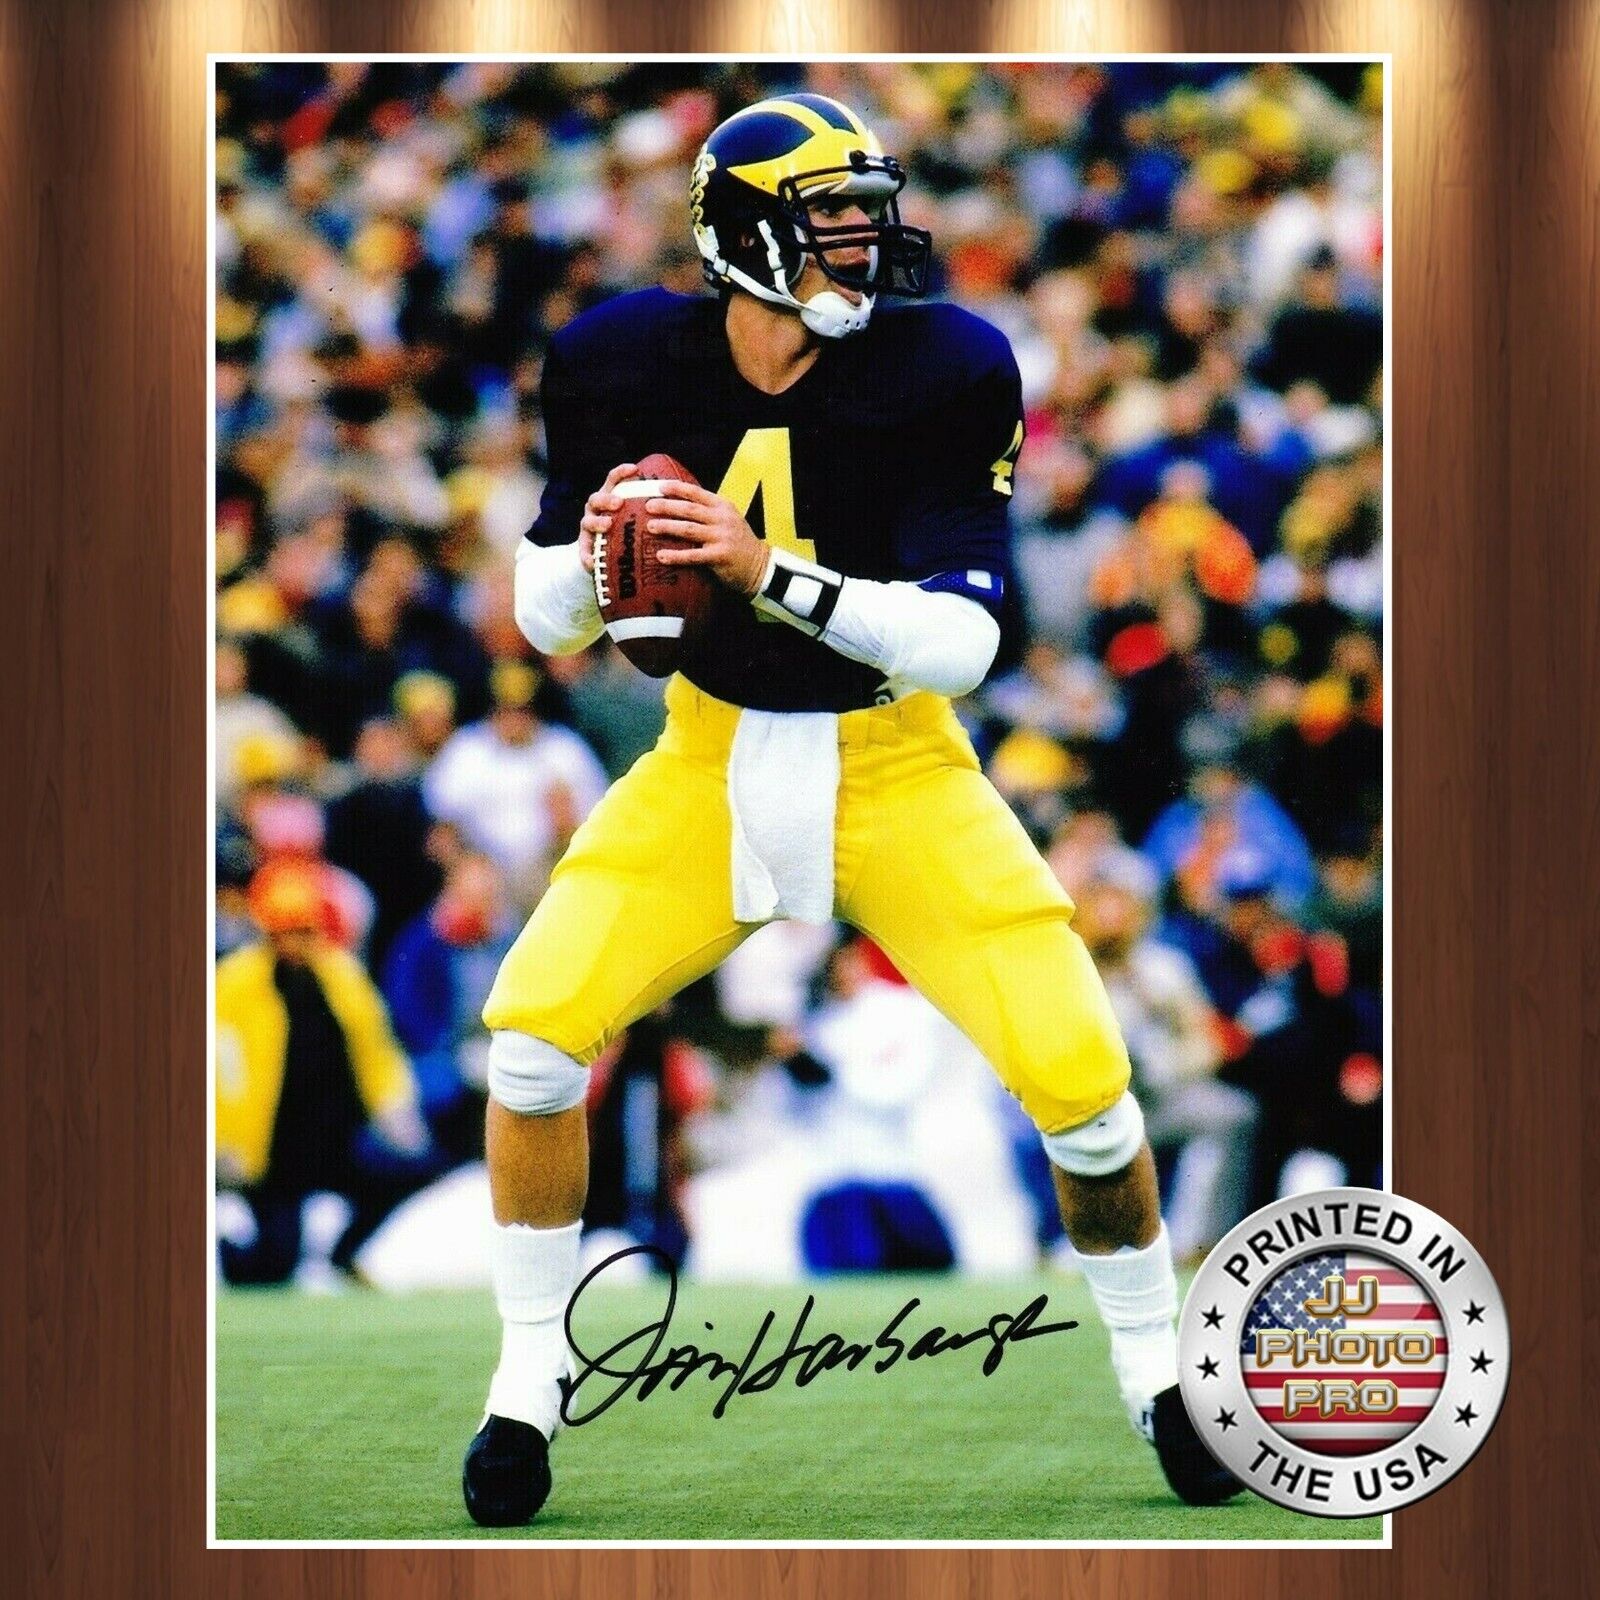 Jim Harbaugh Autographed Signed 8x10 Photo Poster painting (Michigan Wolverines) REPRINT